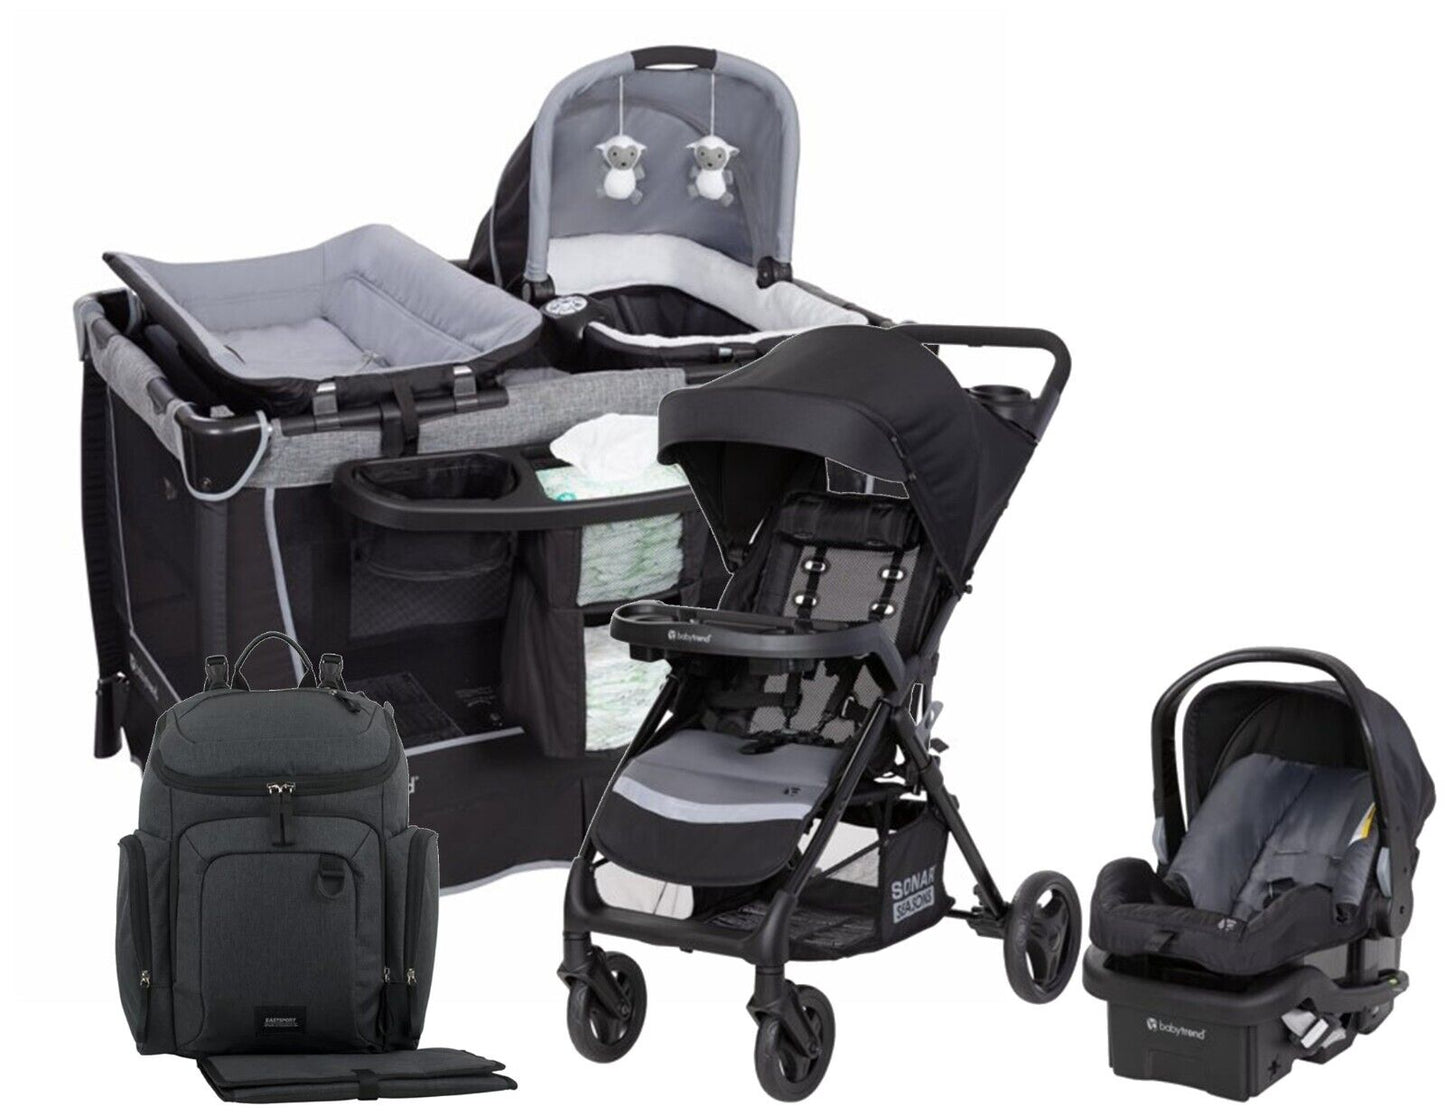 Baby Stroller with Car Seat Playard Diaper Bag Travel System Combo Grey Black